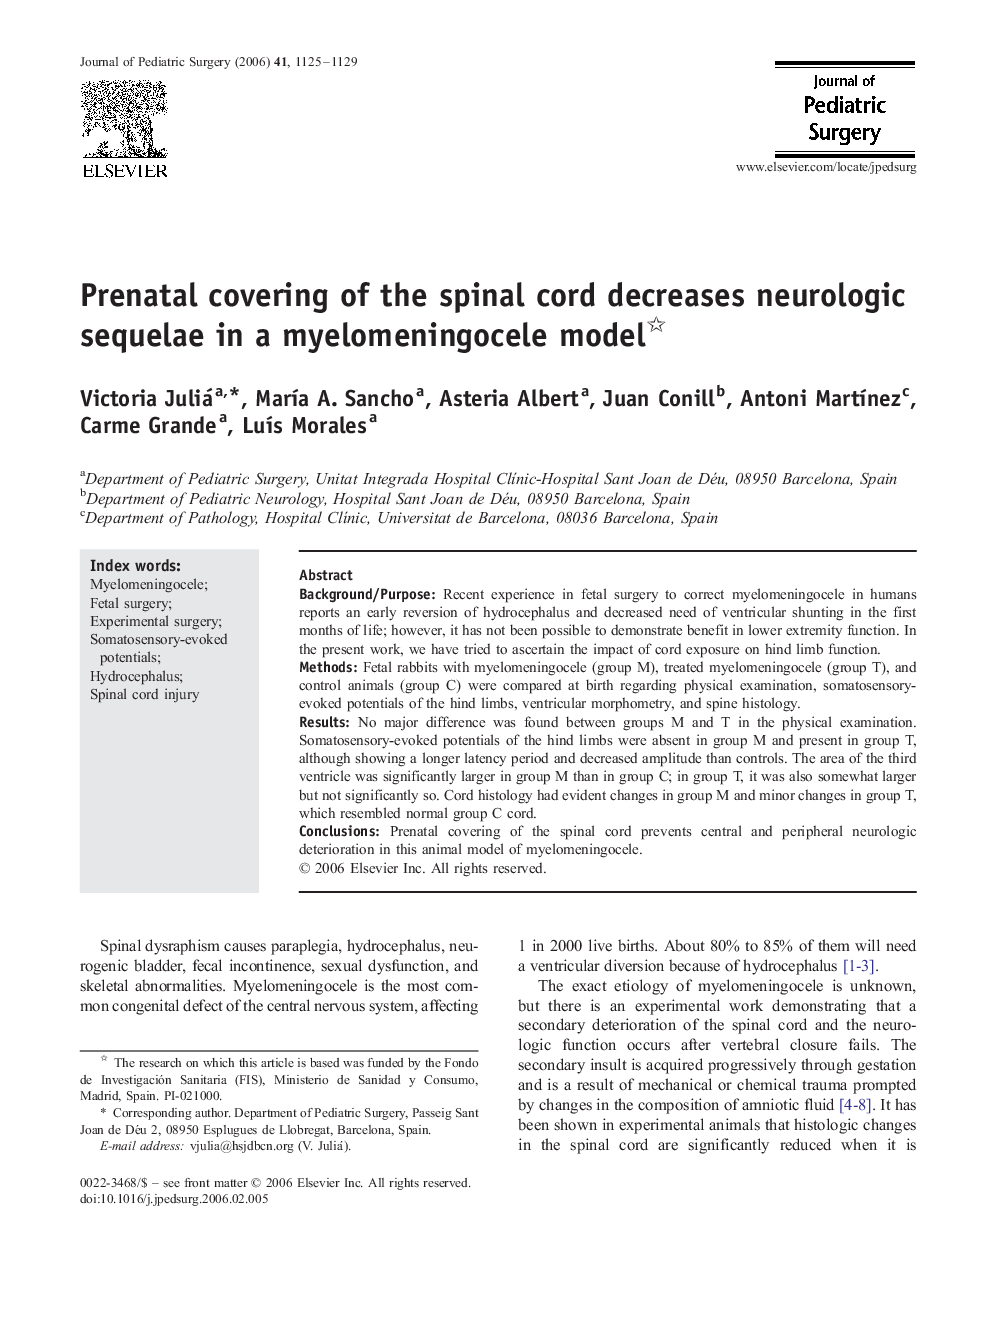 Prenatal covering of the spinal cord decreases neurologic sequelae in a myelomeningocele model 